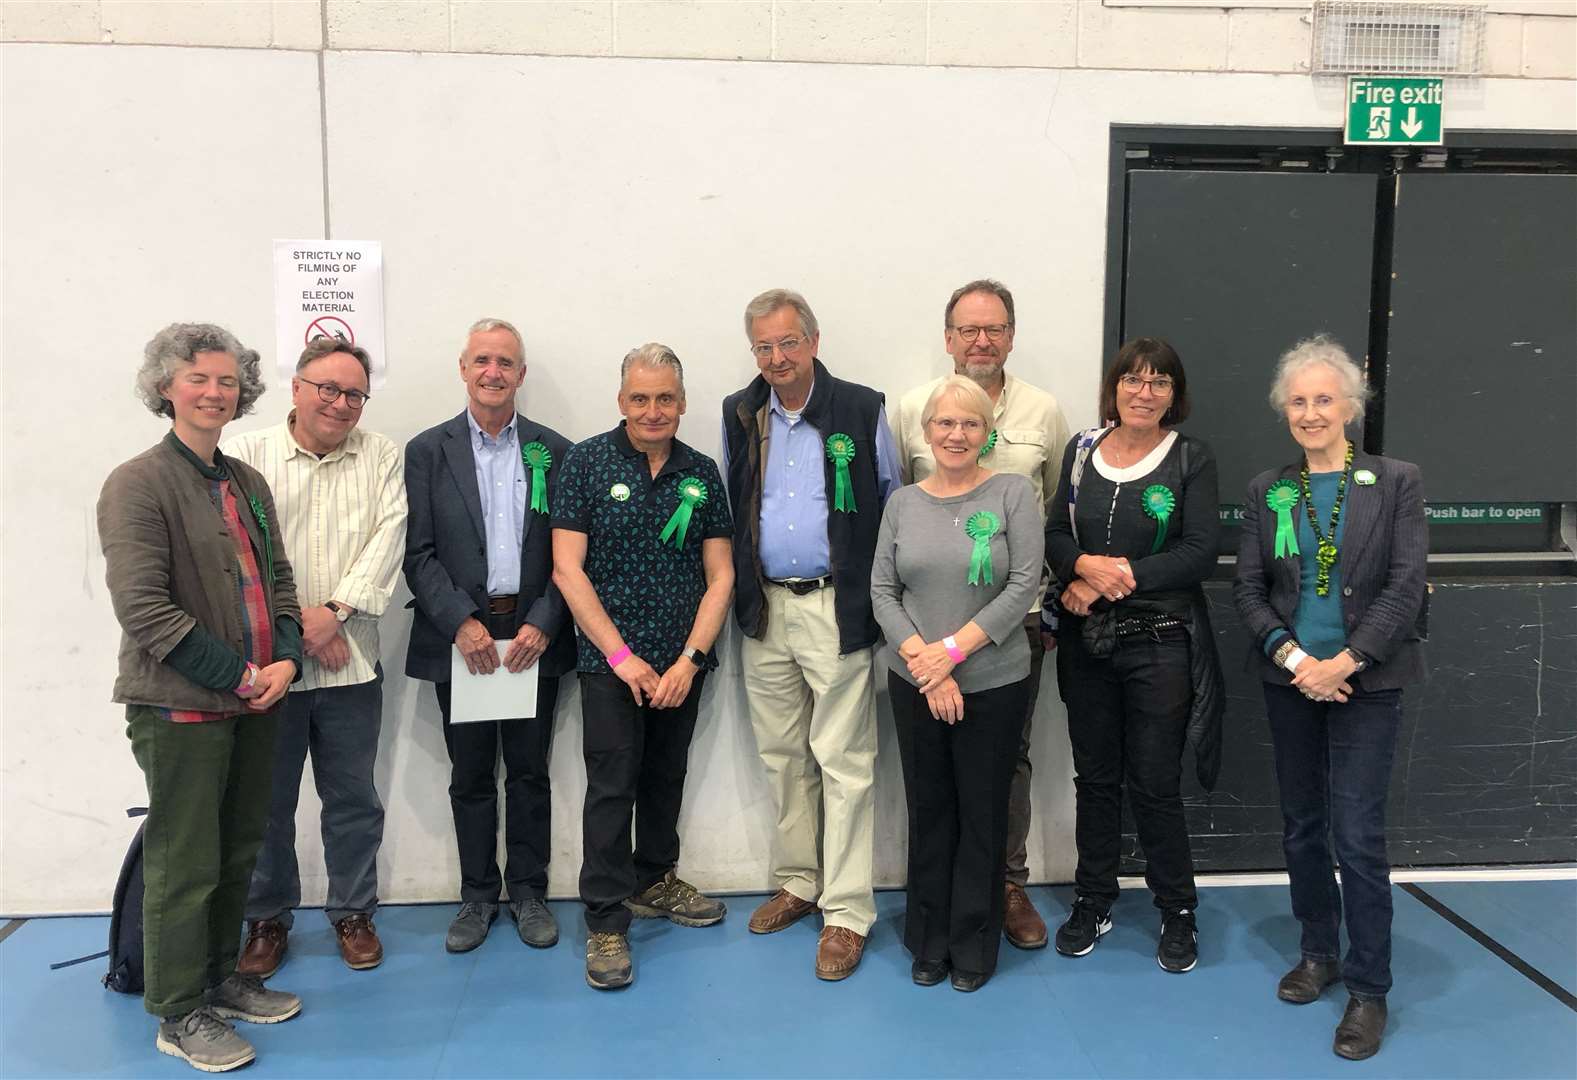 The Green Party won a total of 11 seats - the most in Folkestone & Hythe